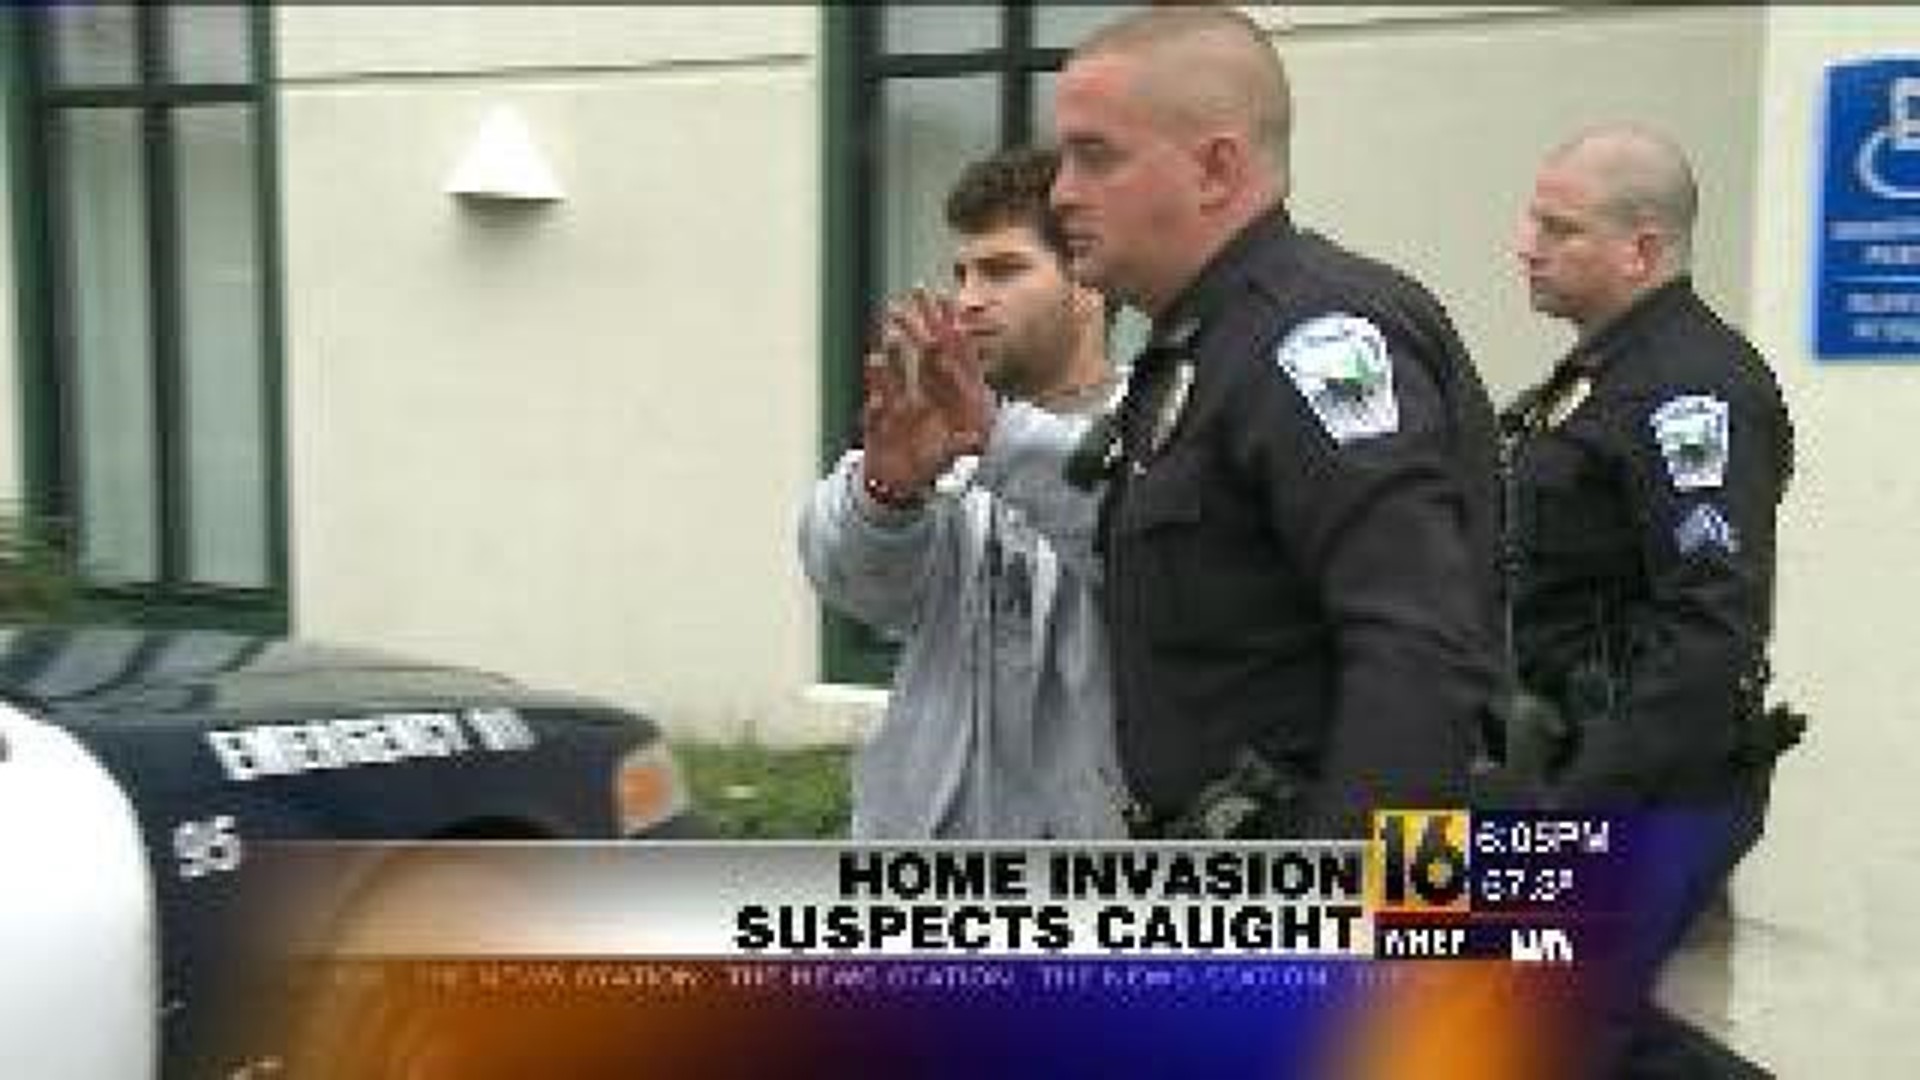 Brothers Break In Home While Homeowner Inside